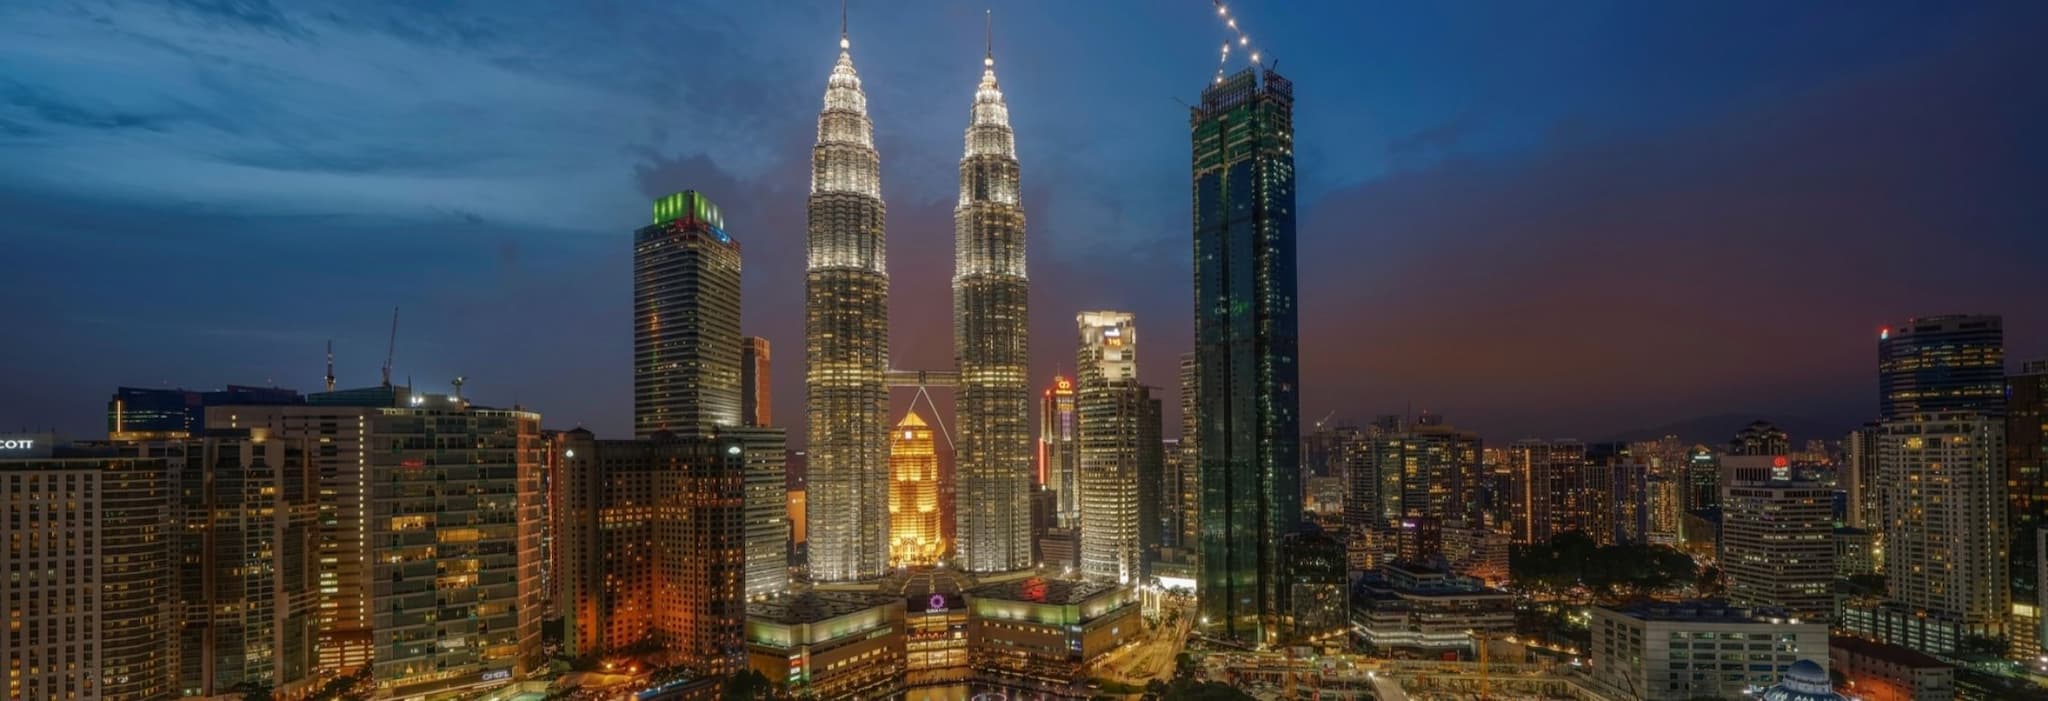 10 Interesting Facts About The Petronas Towers